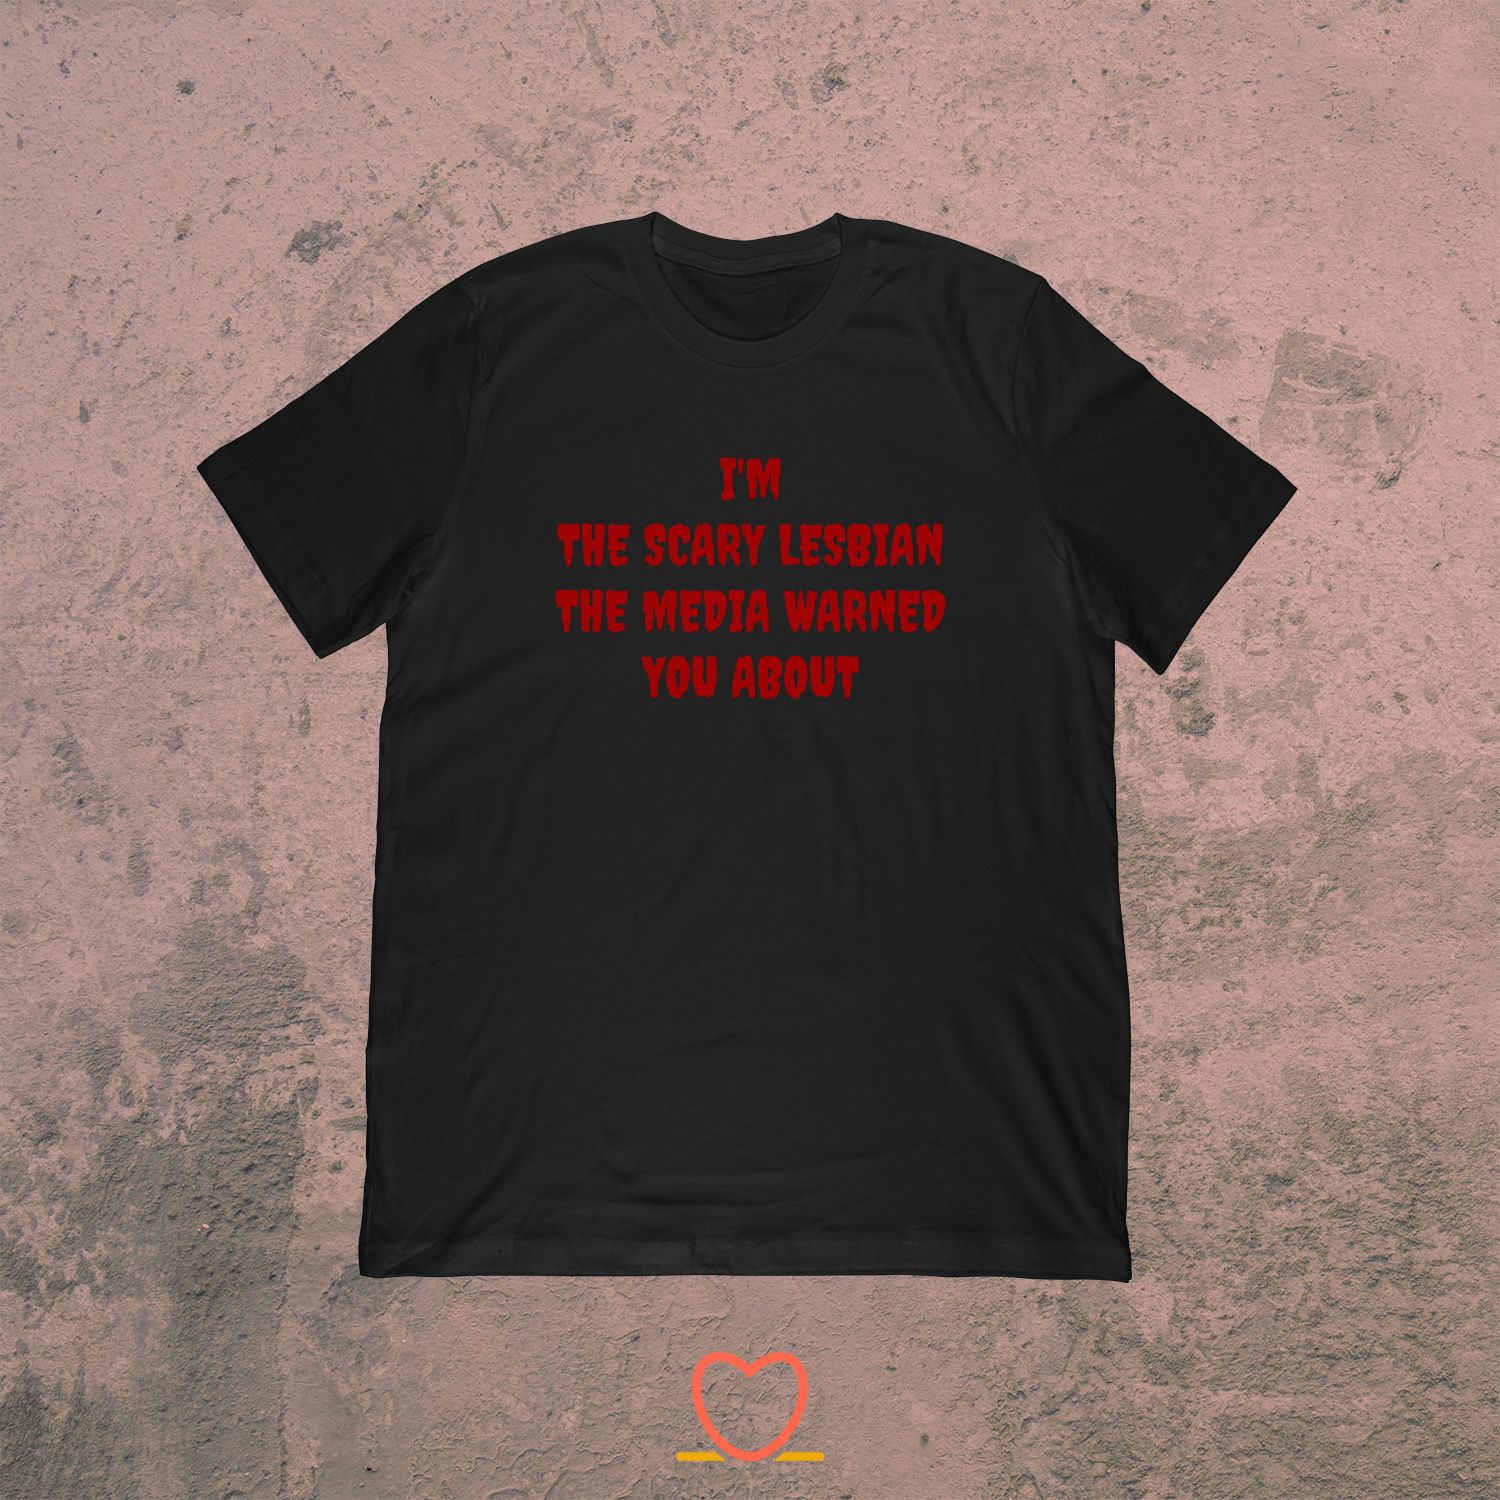 The Scary Lesbian Media Warned You About – Funny Gay Horror Tee